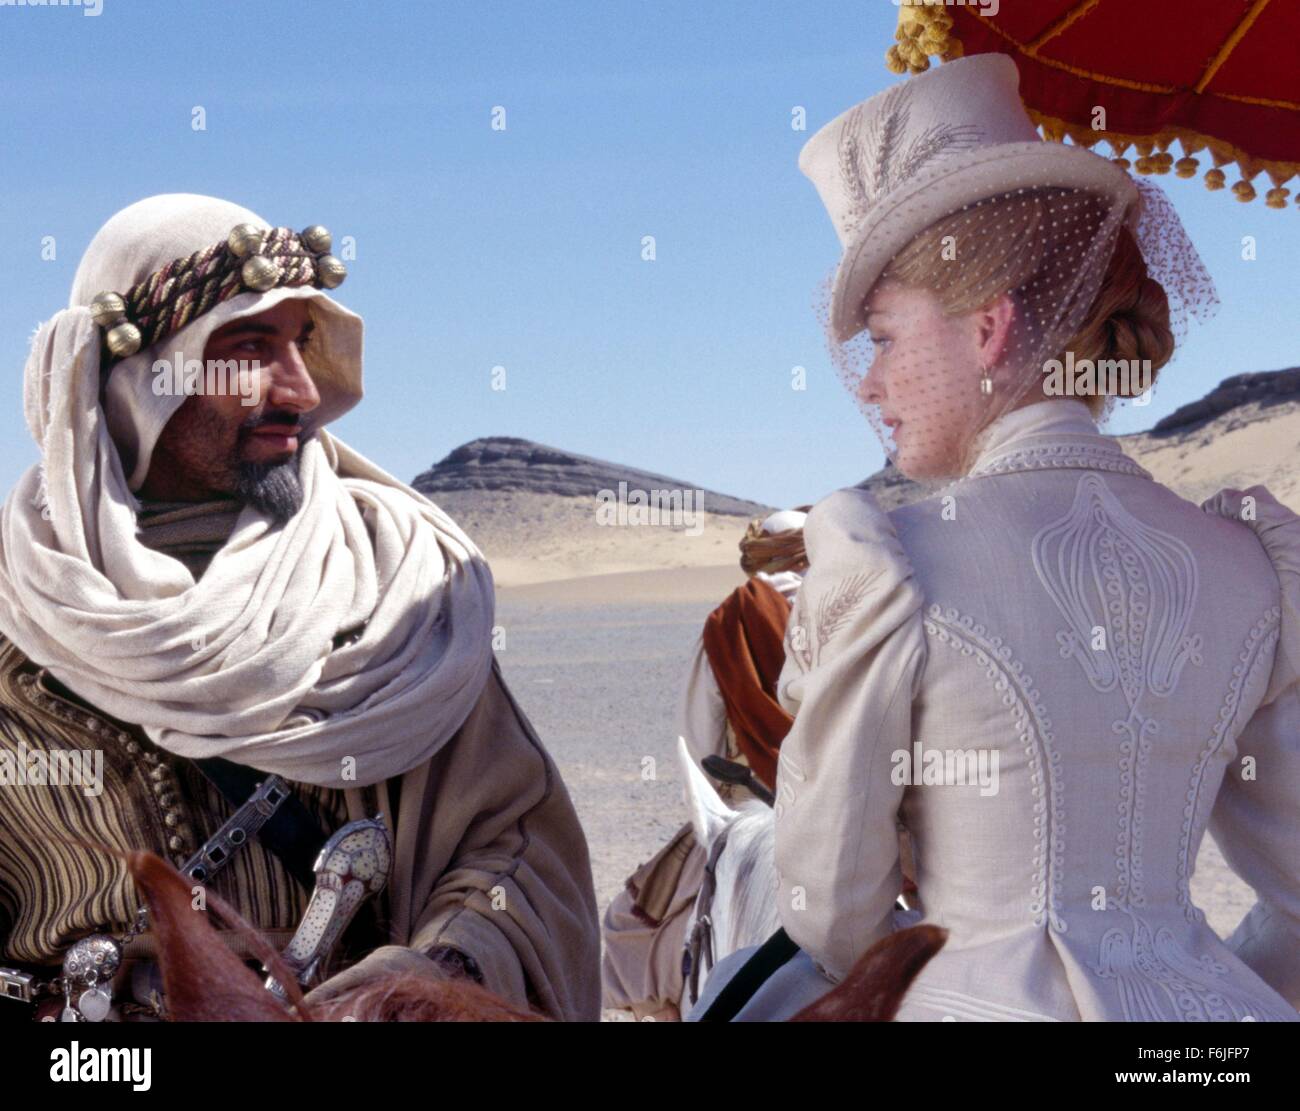 RELEASE DATE: March 5, 2004. MOVIE TITLE: Hidalgo. STUDIO: Touchstone Pictures. PLOT: In 1890, a down-and-out cowboy and his horse travel to Arabia compete in a deadly cross desert horse race. PICTURED: SILAS CARSON as Katib and LOUISE LOMBARD as Lady Anne Davenport. Stock Photo